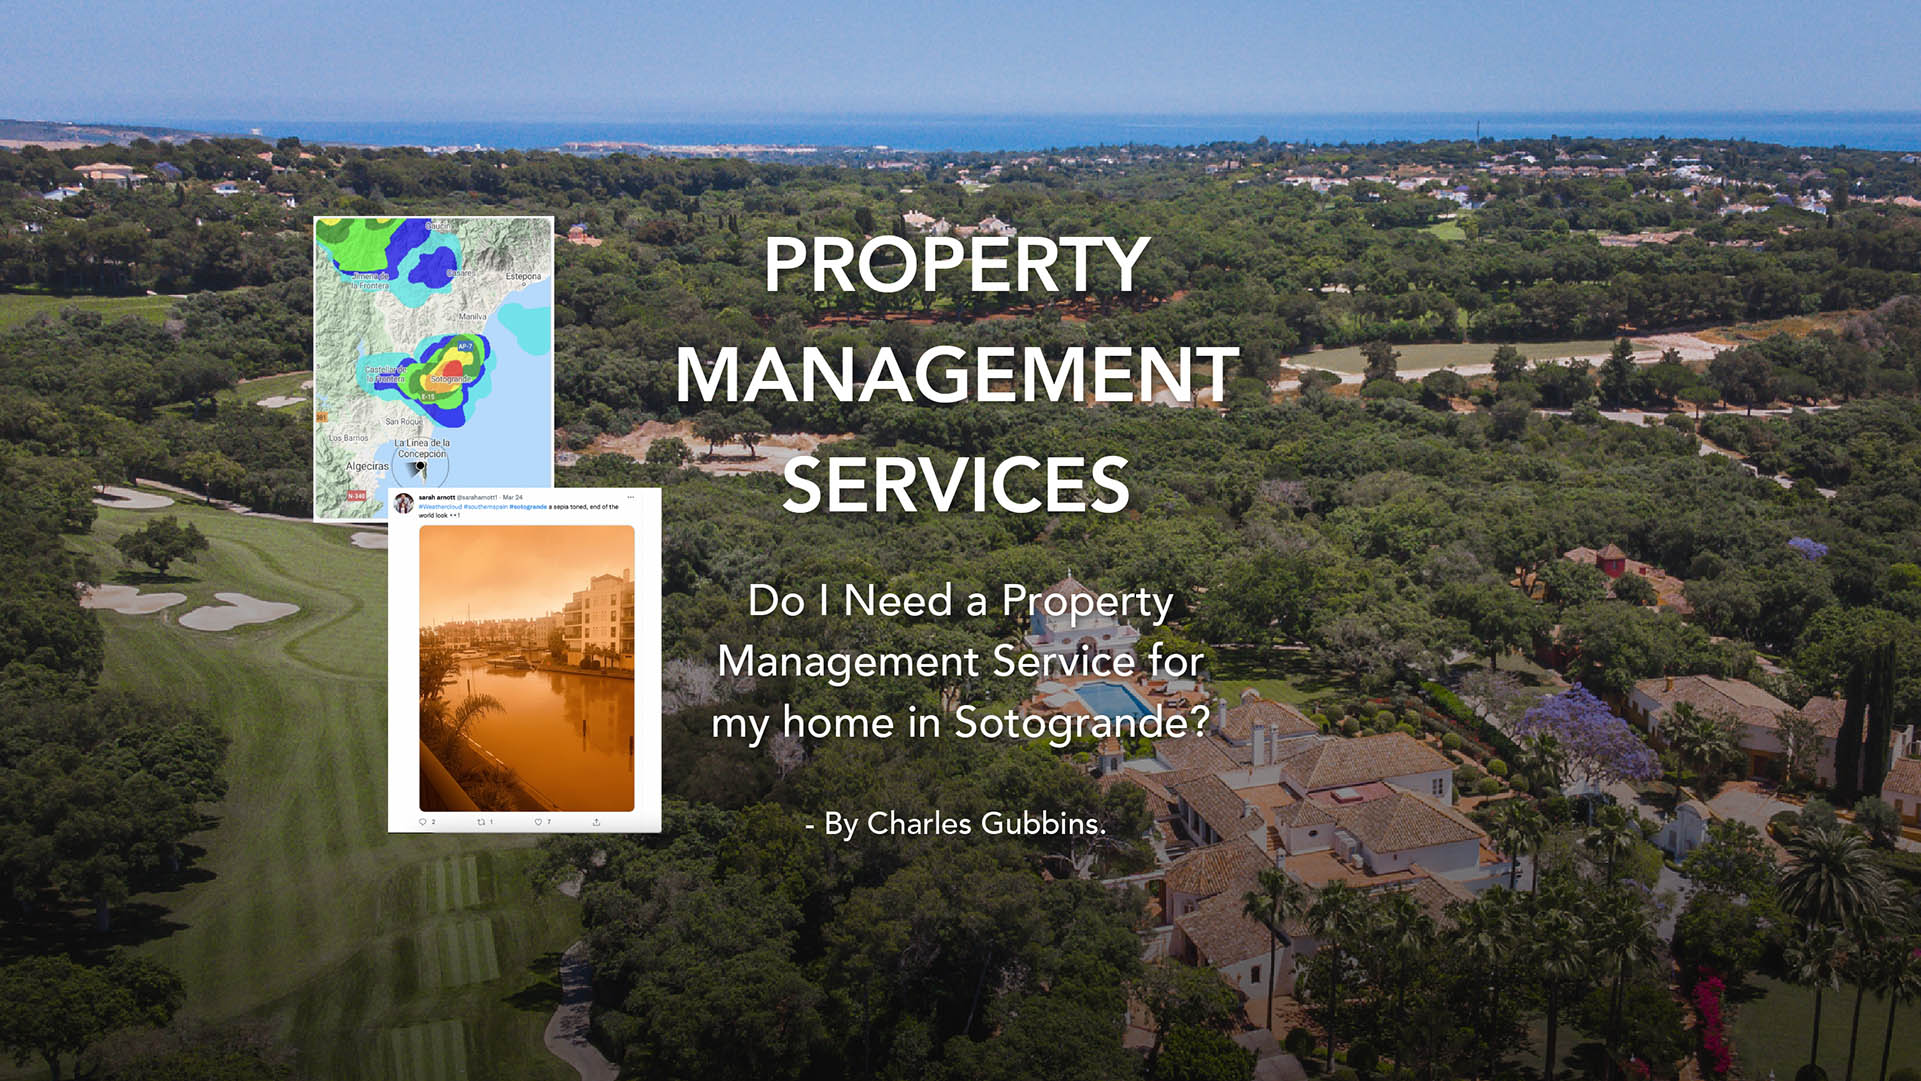 Do I Need a Property Management Service for my home in Sotogrande